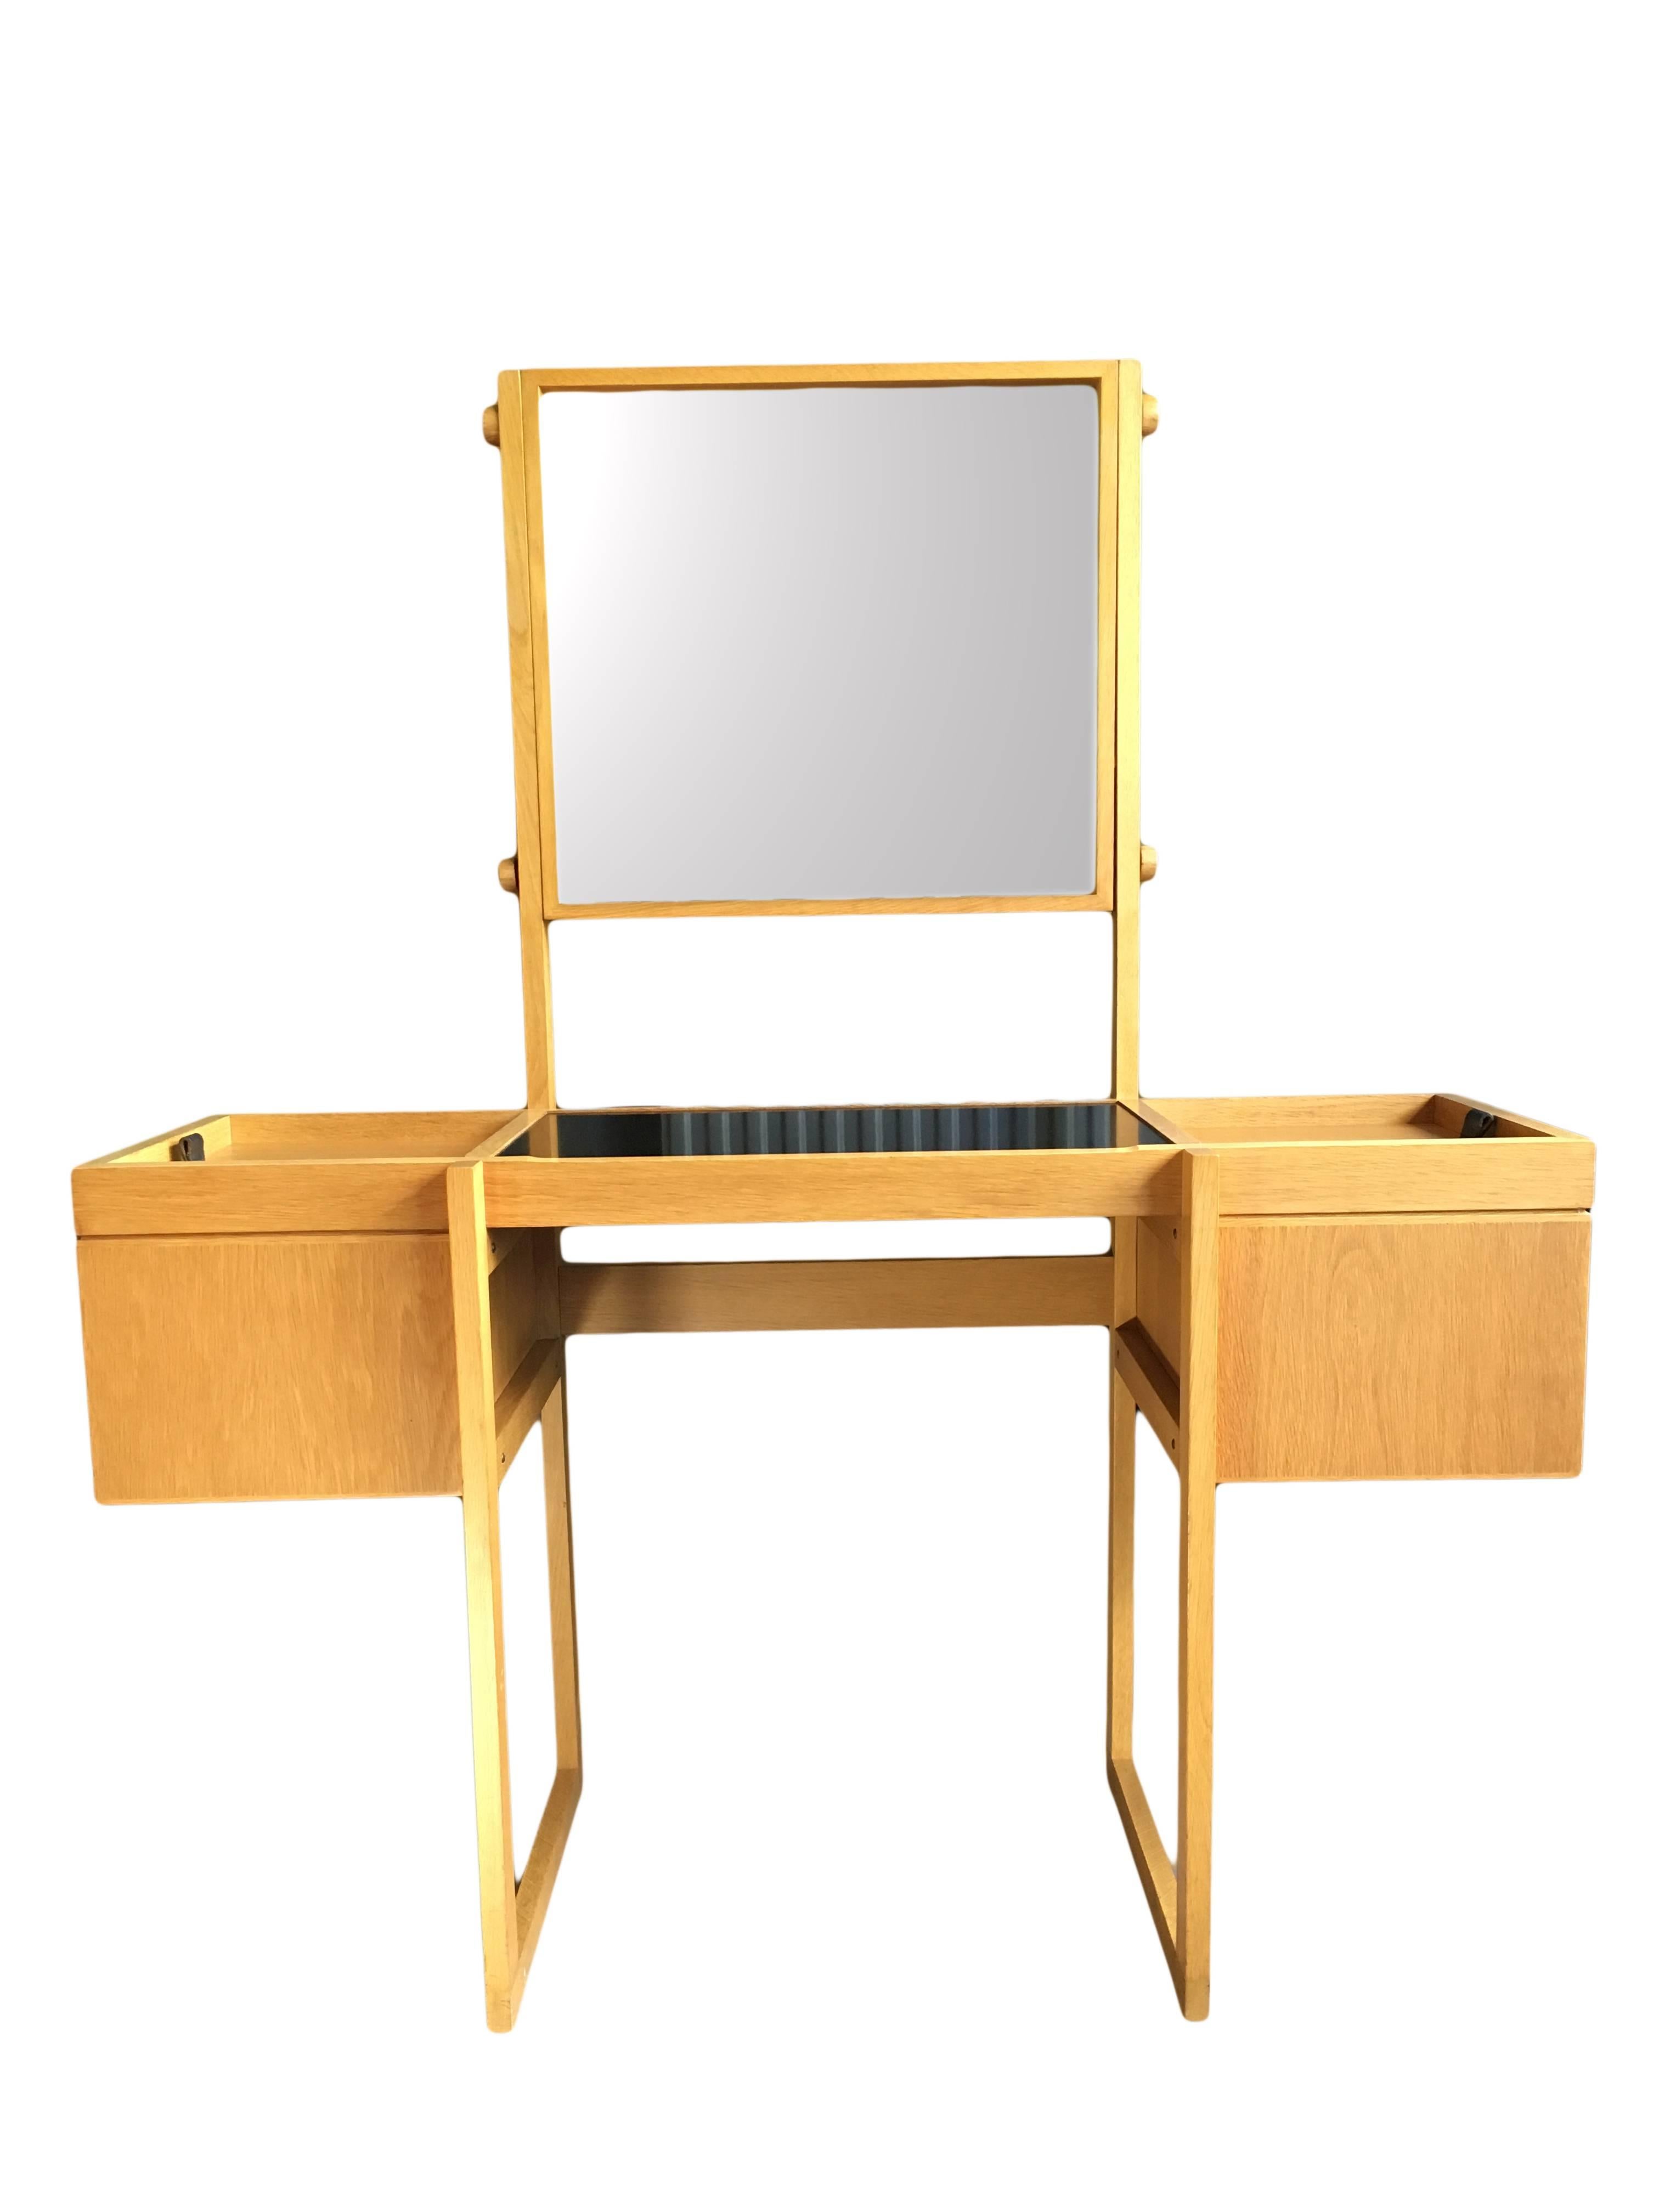 A unique Mid-Century dressing table or vanity unit produced in Denmark, circa 1960s. Total Scandinavian modernism. Solid oak construction with leather pull handles, black surface and tilt adjustable mirror by means of oak stoppers. Superb condition.